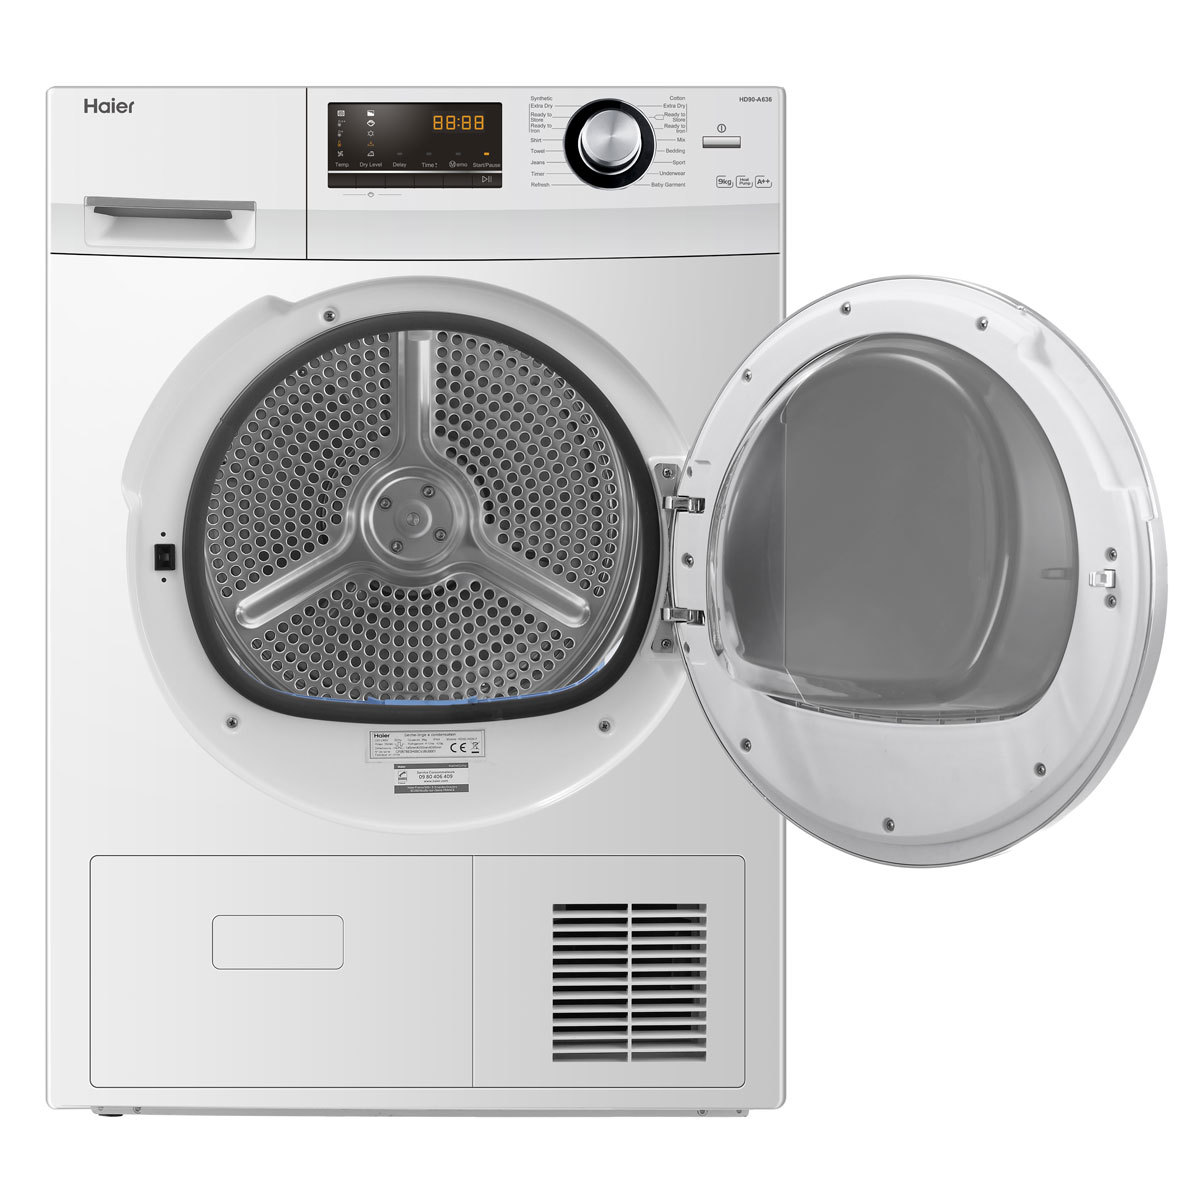 Haier HD90-A636, 9kg, Heat Pump Tumble Dryer A++ Rated in White